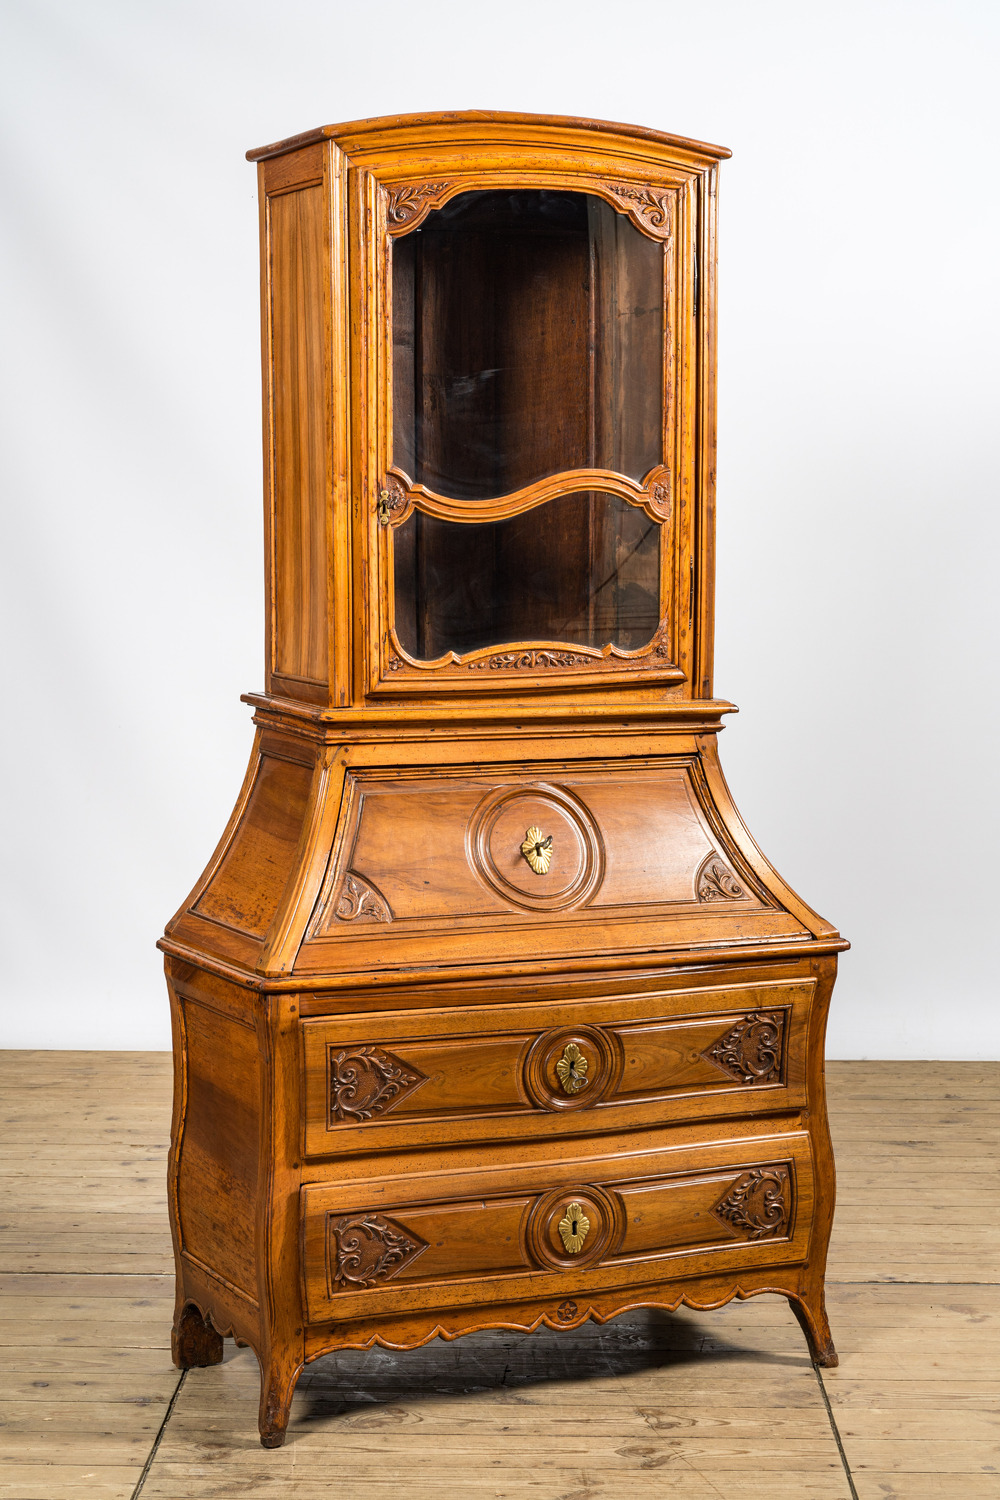 A walnut display secretaire, 2nd half of the 18th C.